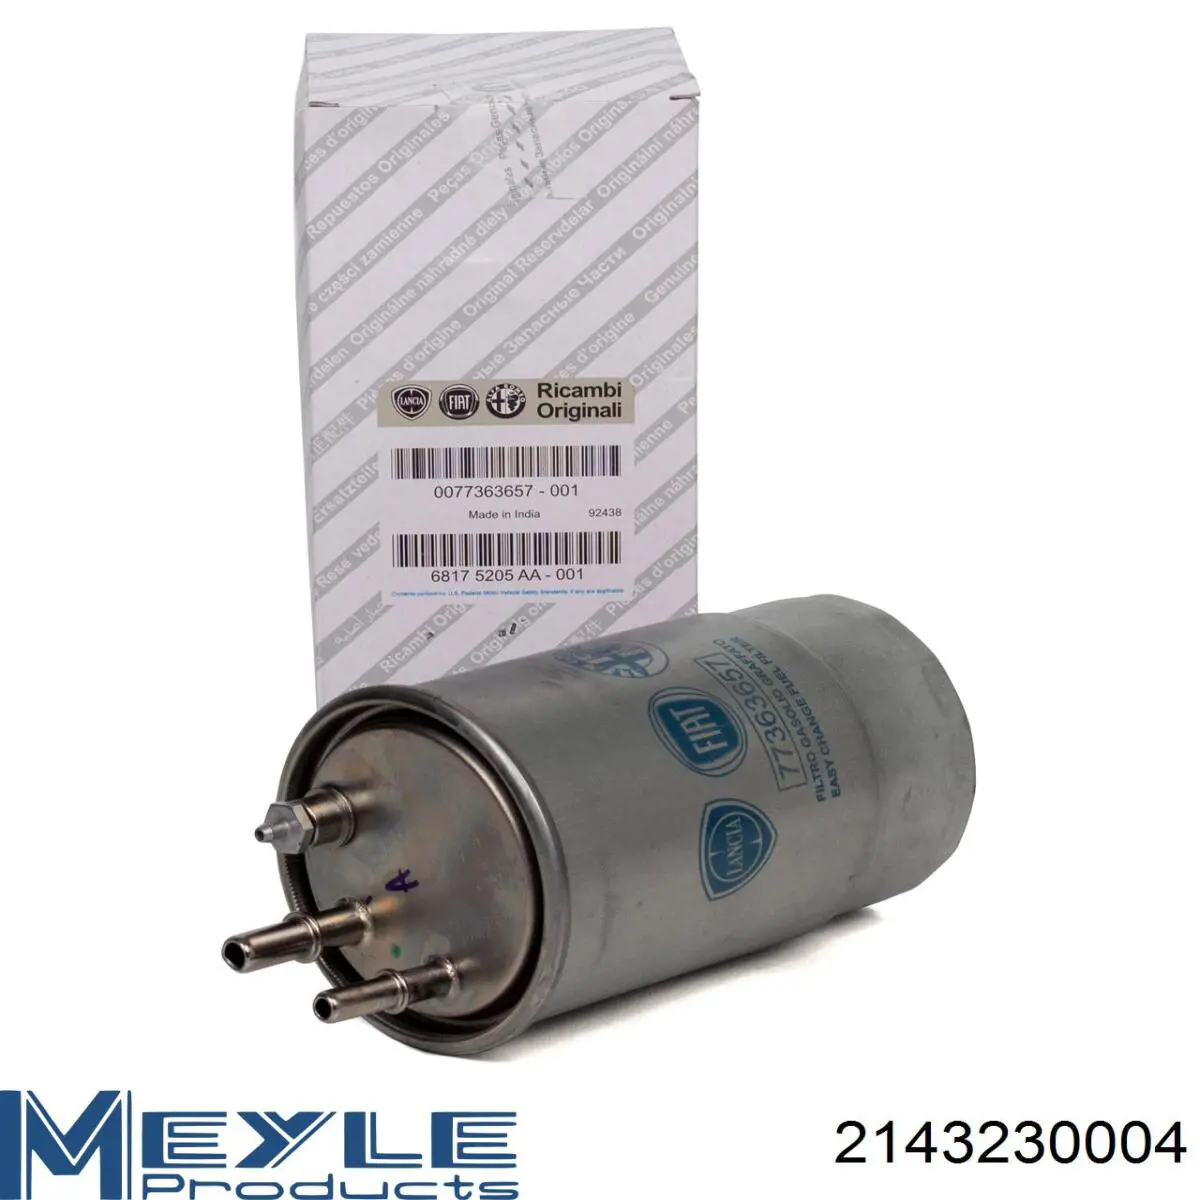 Filtro combustible 2143230004 Meyle